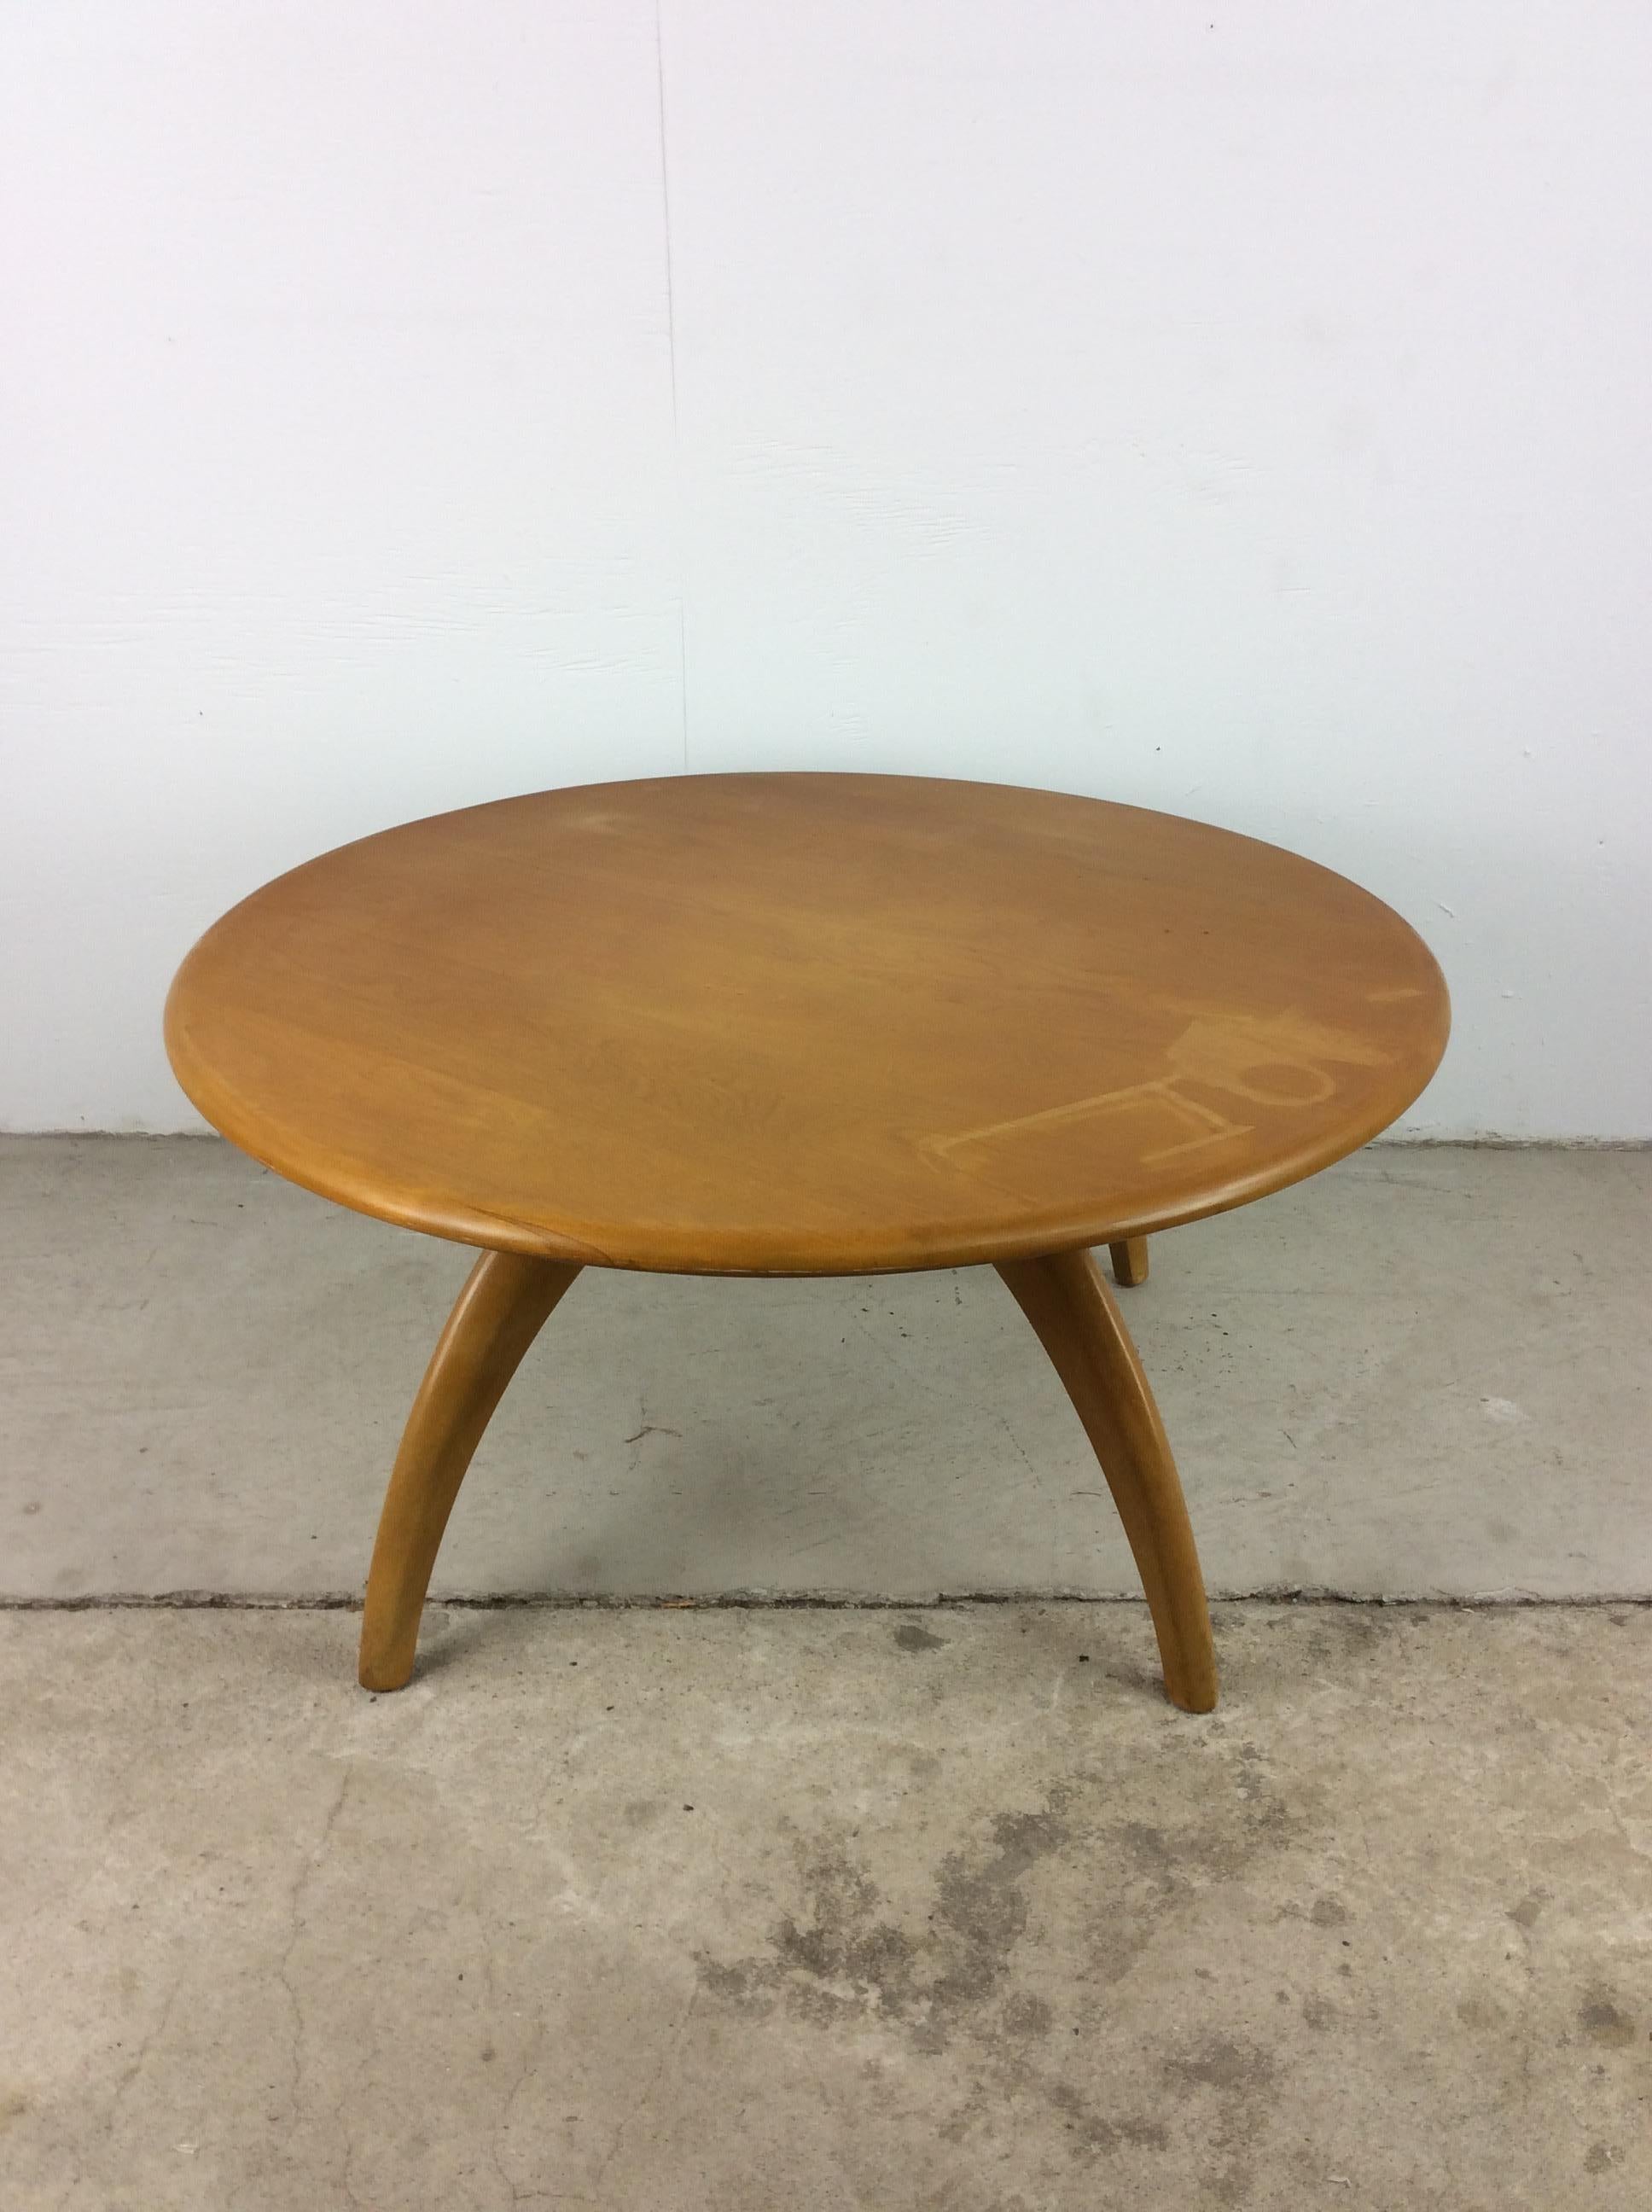 This mid century modern coffee table by Heywood Wakefield features hardwood construction, original champagne finish, swivel top (lazy Susan style), and tall tapered legs.

Check out our other Heywood Wakefield pieces.

Dimensions: 32w 32d 15h



